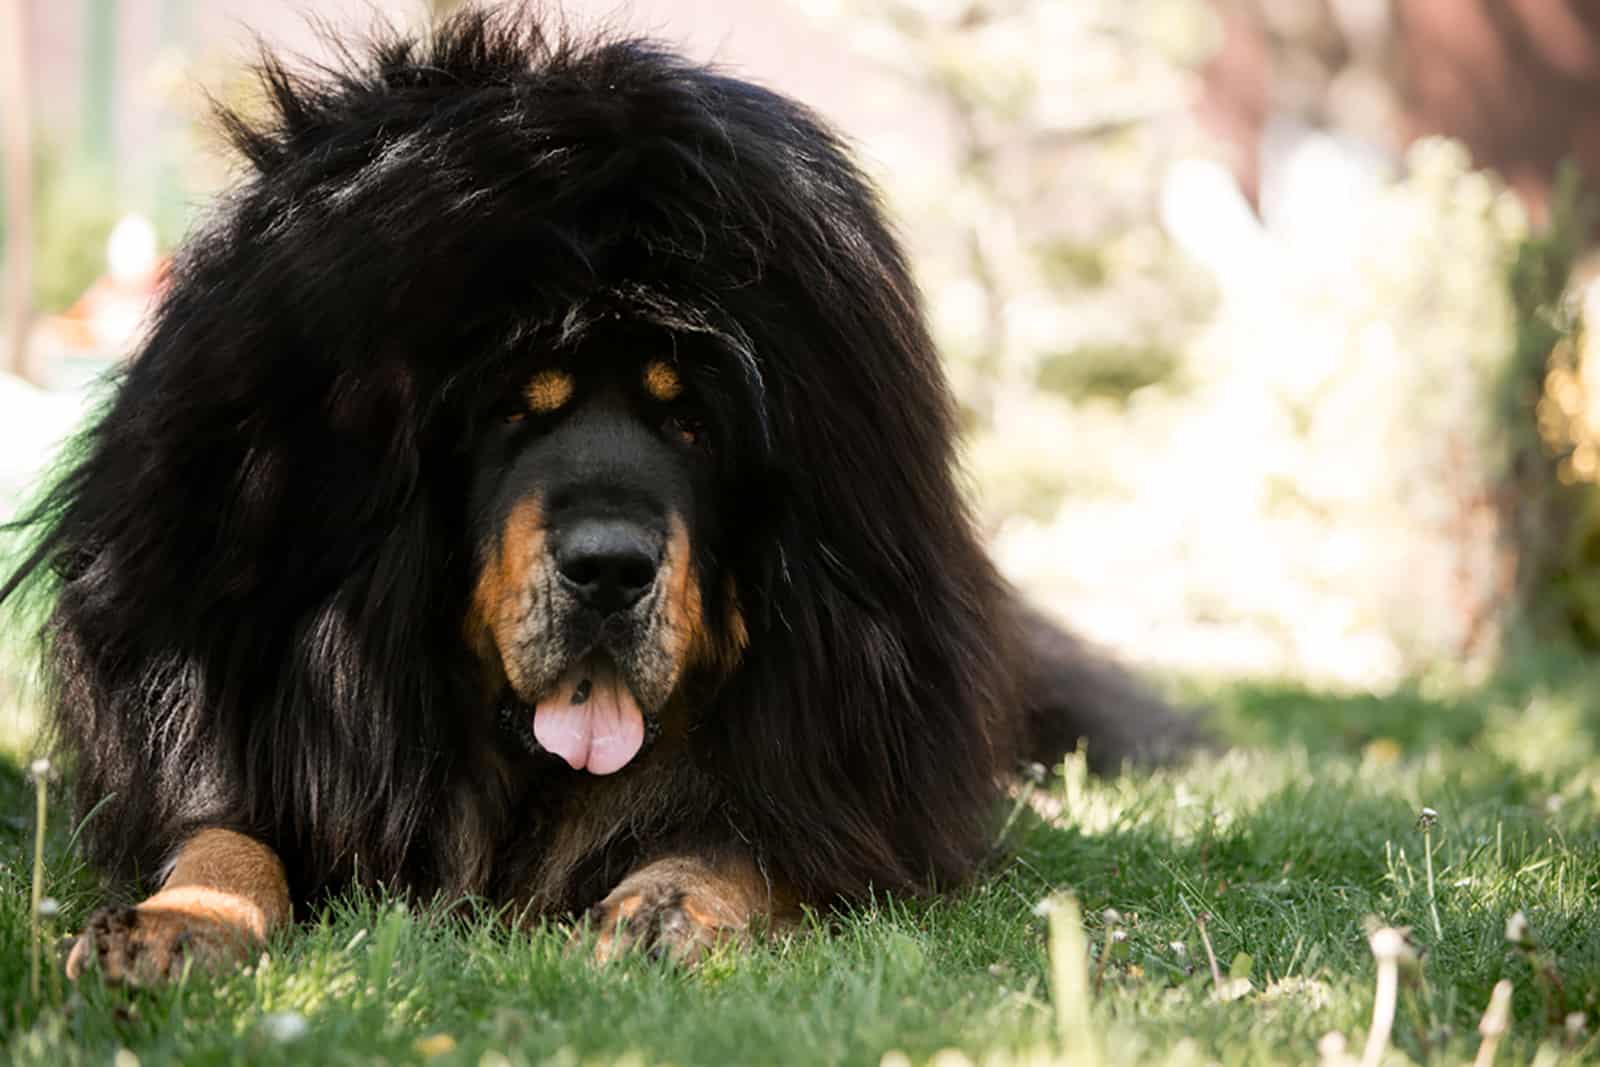 Tibetan Mastiff Growth Chart Shows The Size Of Fluffy Giants